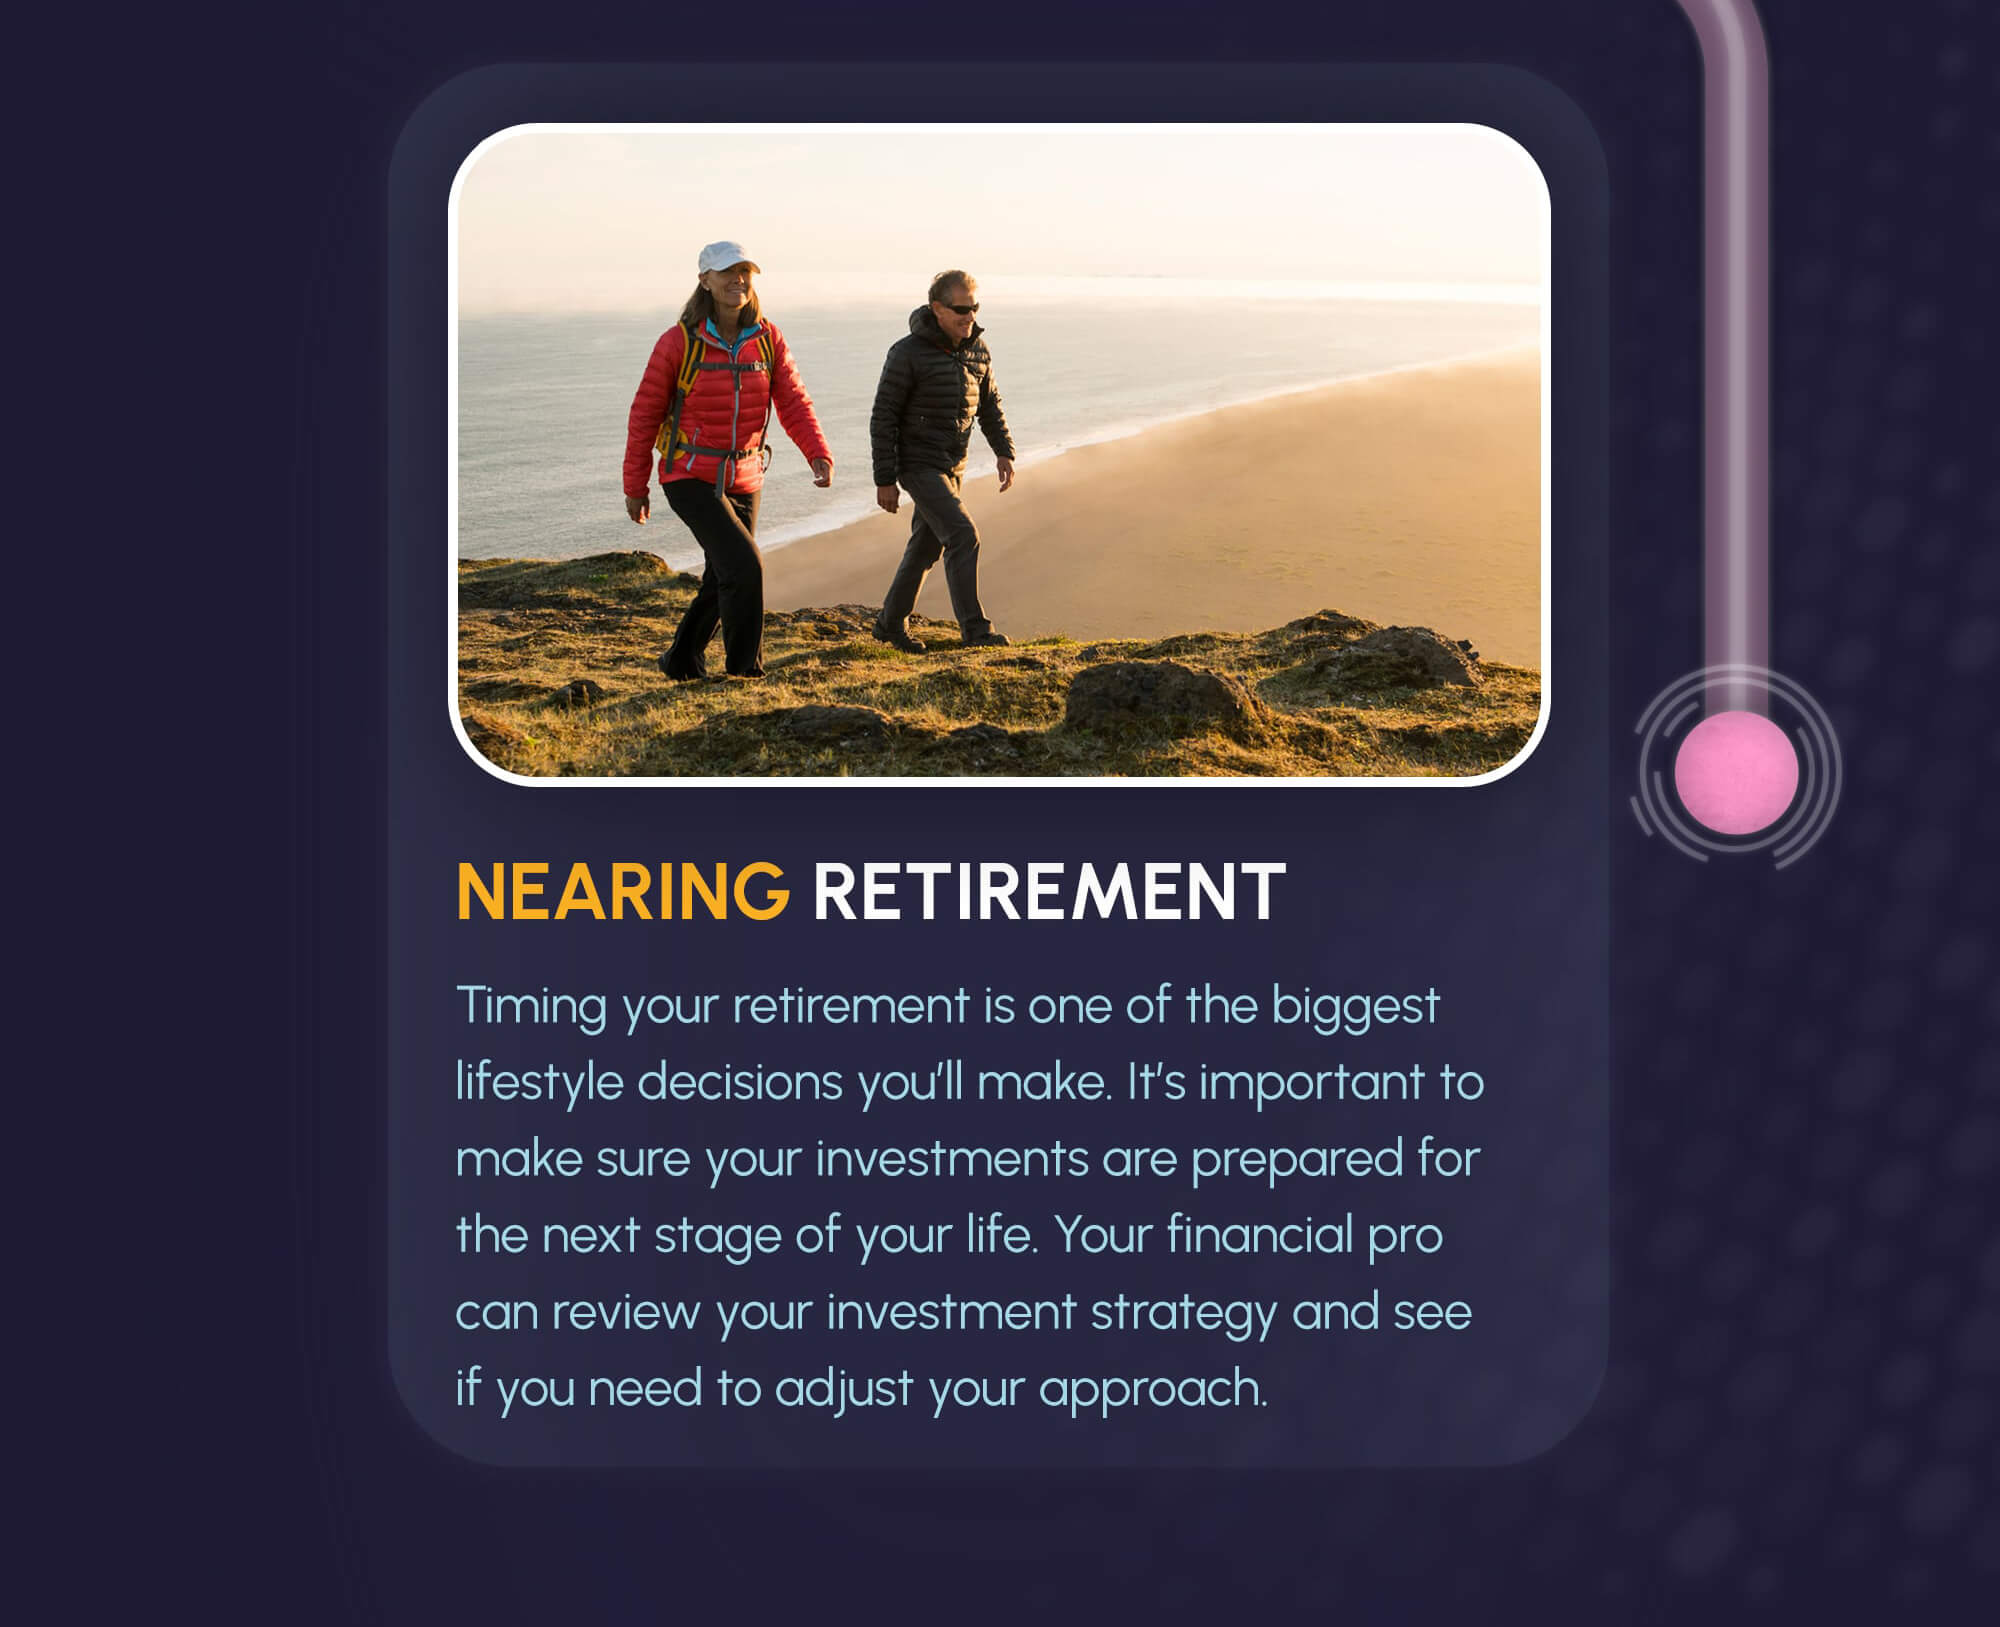 The path from the labyrinth goes down to the fourth and final image and text. The image shows a woman and a man hiking on a green cliff overlooking a beach and the ocean. The title underneath reads, Nearing Retirement. The text underneath reads: Timing your retirement is one of the biggest lifestyle decisions you’ll make. It’s important to make sure your investments are prepared for the next stage of your life. Your financial pro can review your investment strategy and see if you need to adjust your approach.